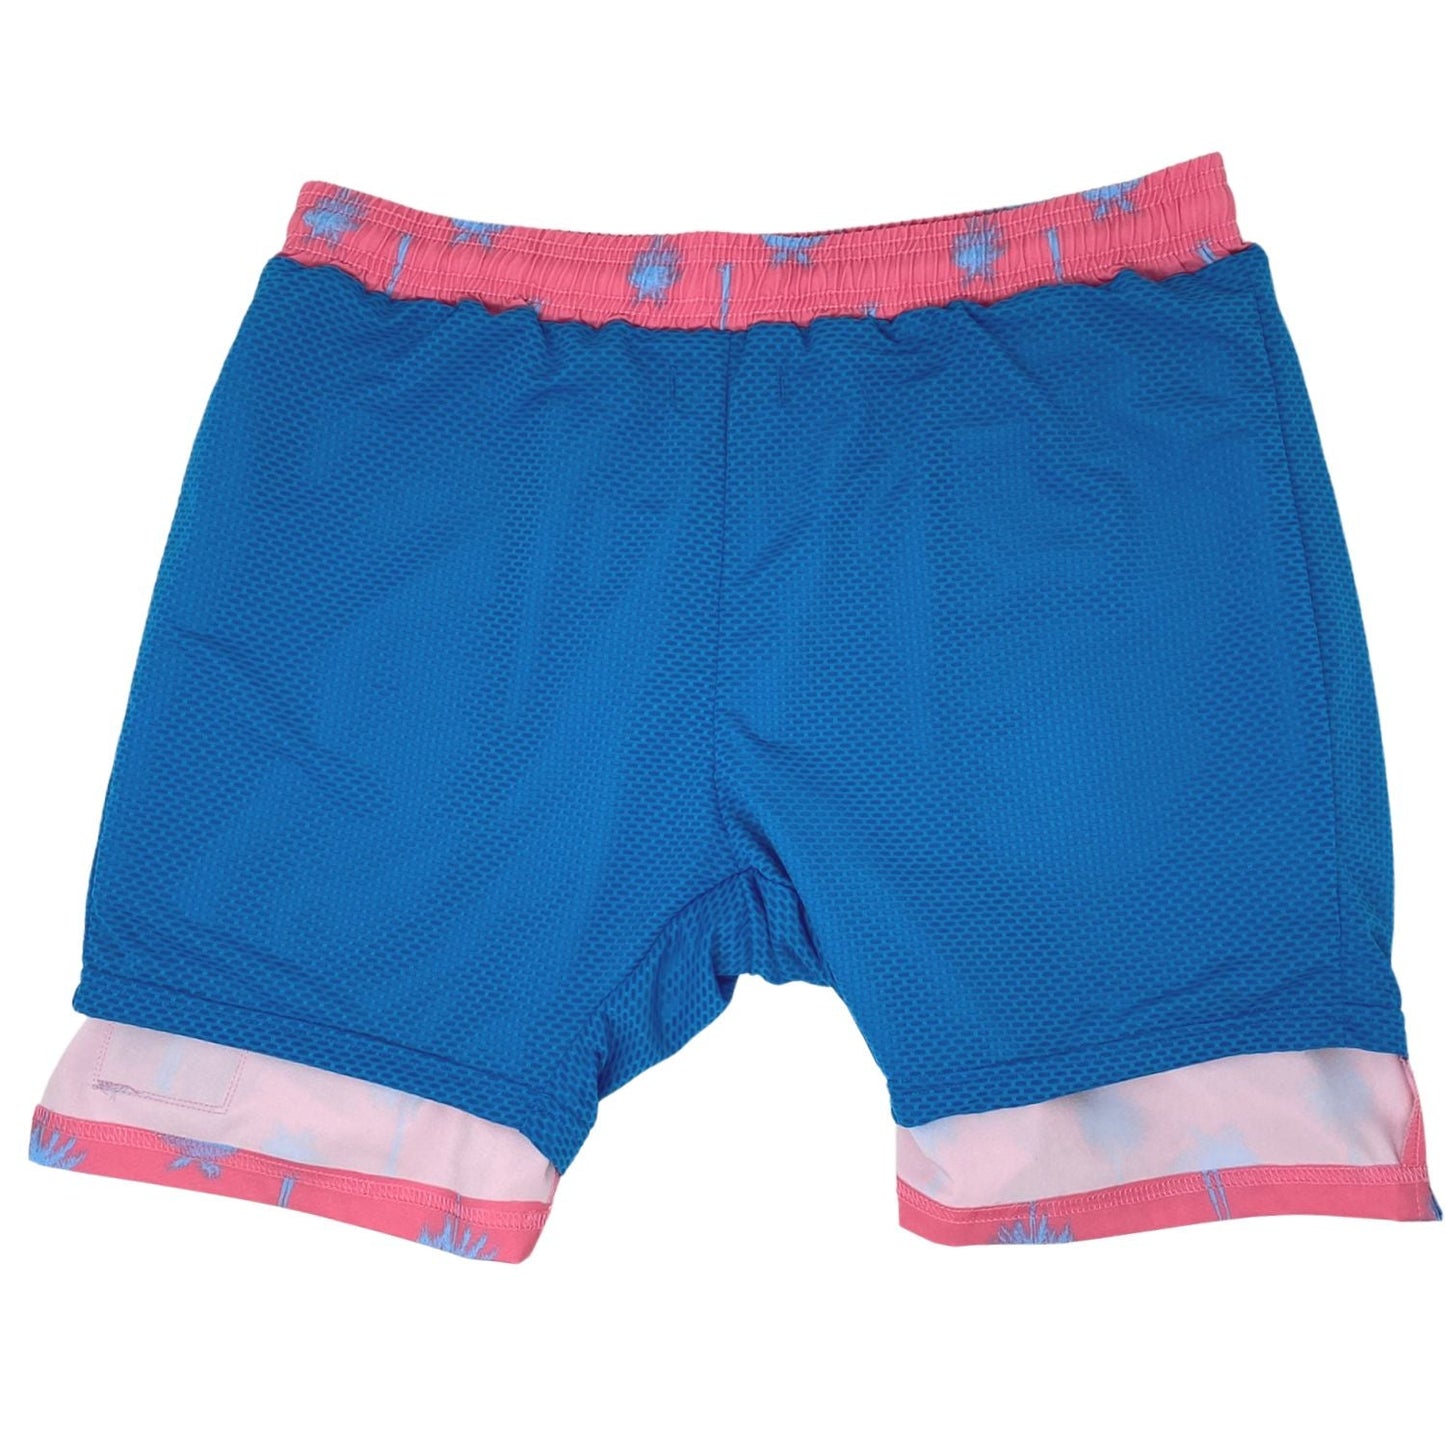 Boogie Nights Swimsuit Shorts by Tropical Bros